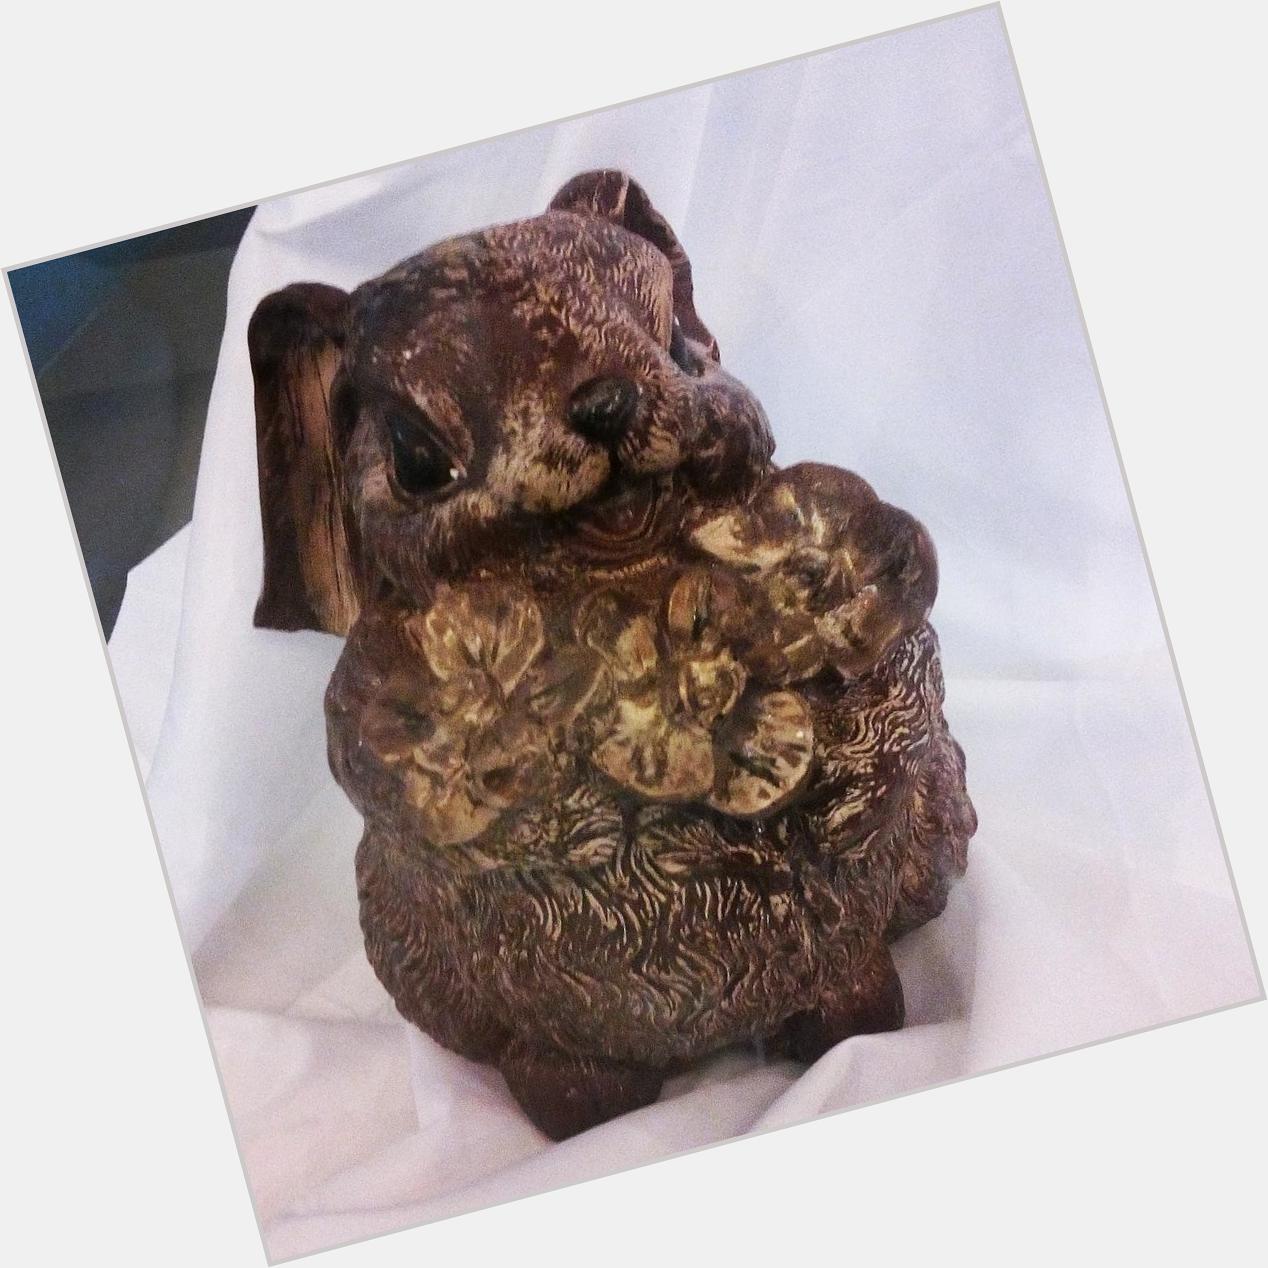  It\s for you - chocolate rabbit with flowers )) Happy birthday! ;) 